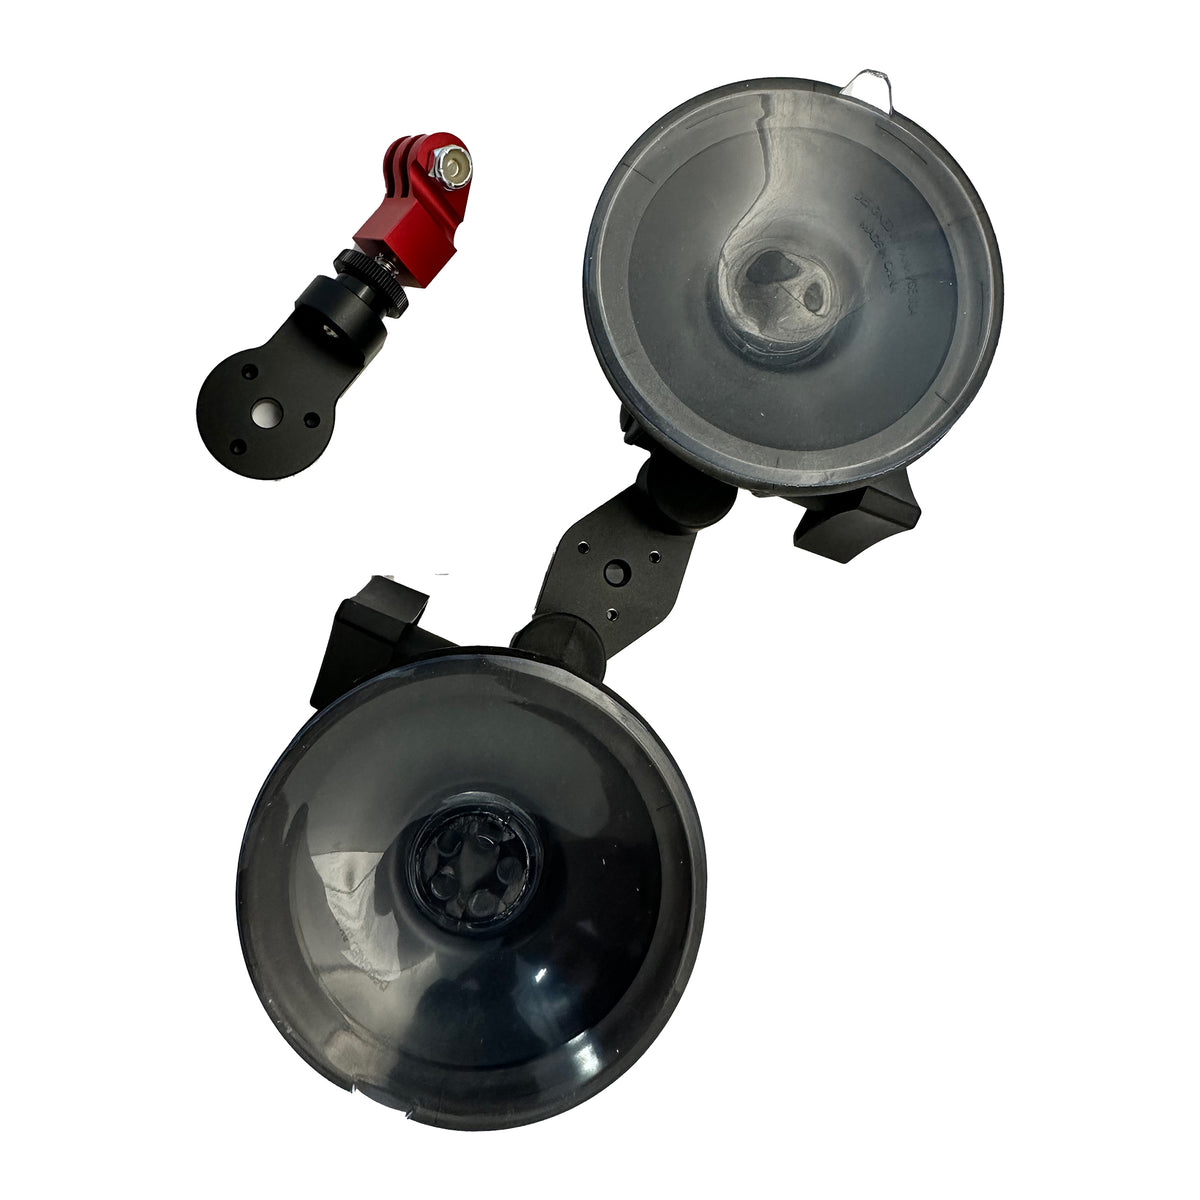 Rock Steady Double Suction Cup Mount